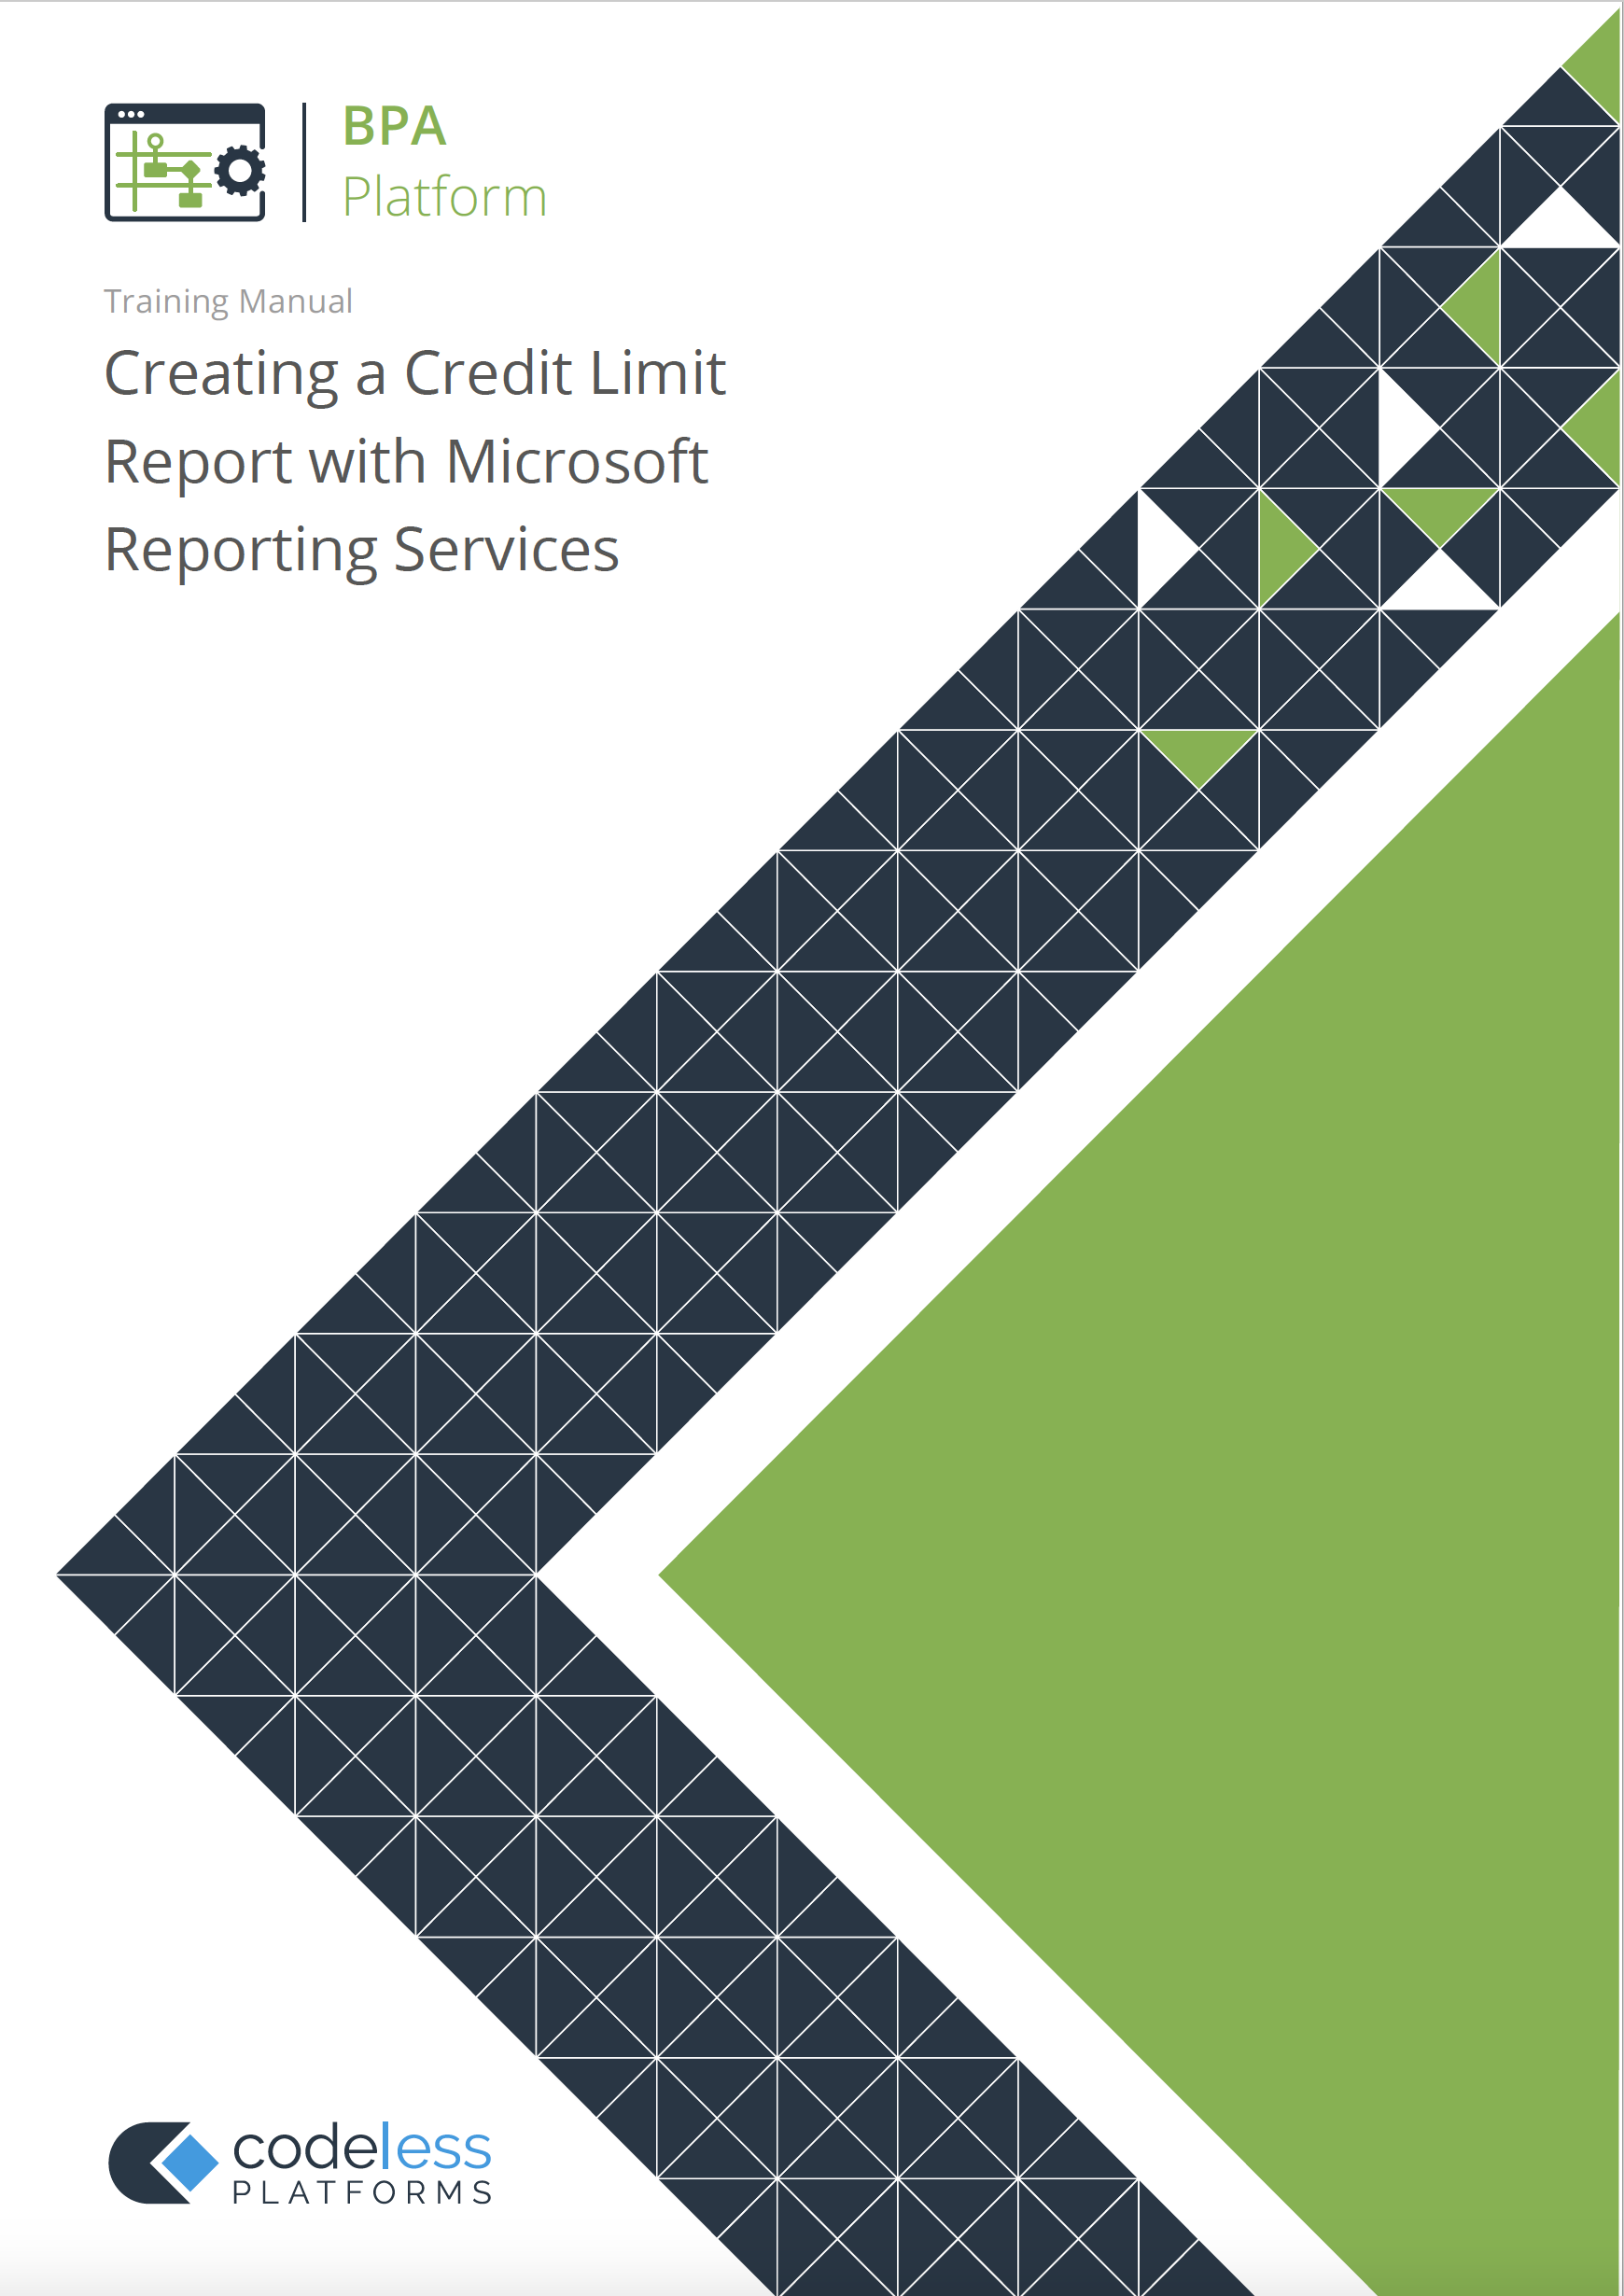 Creating a Credit Limit Report with Microsoft Reporting Services